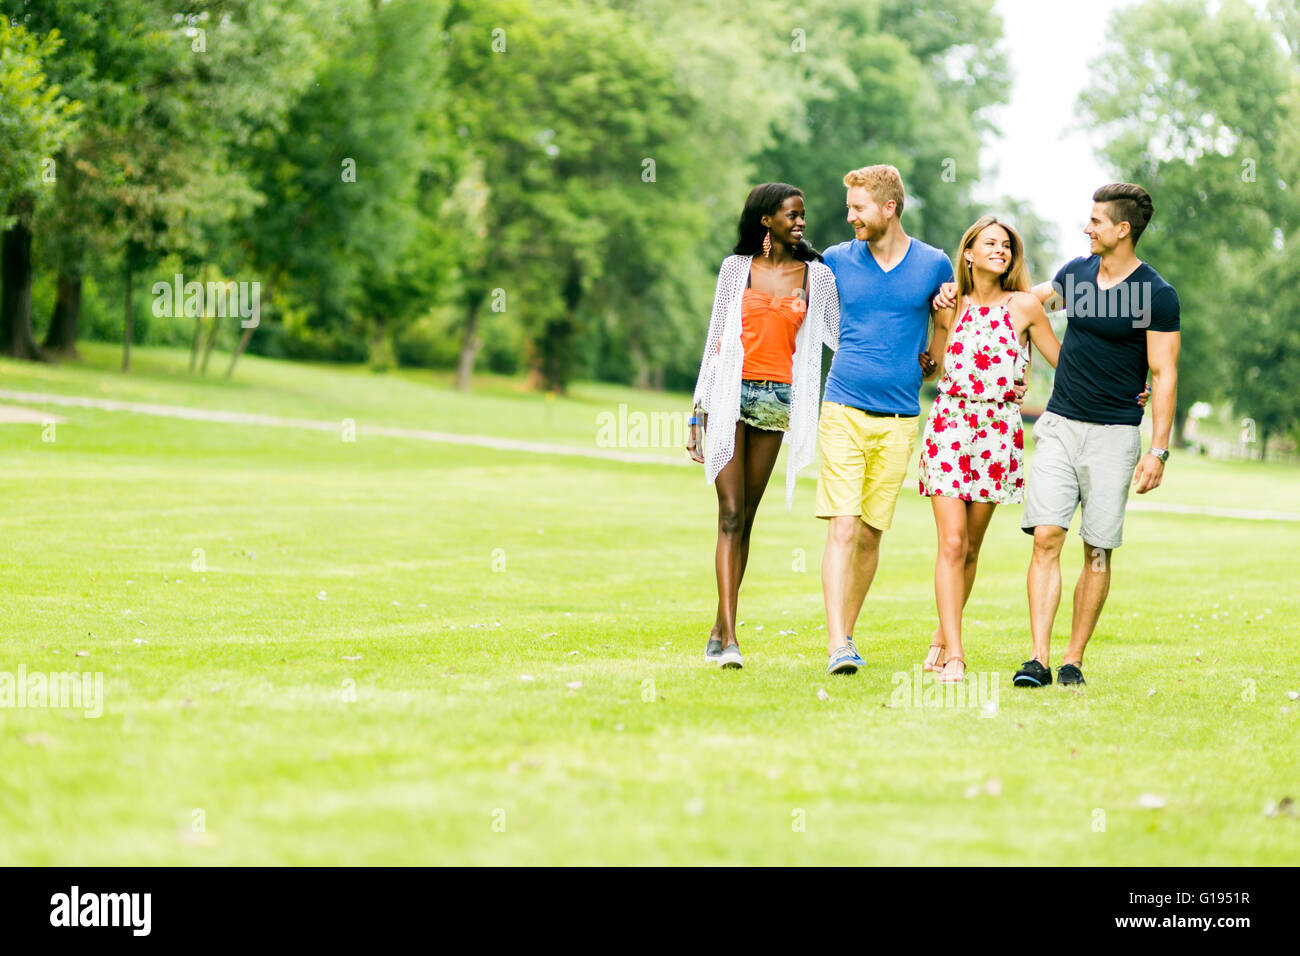 Cheerful friends walking in nature outdoors and having a good time Stock Photo